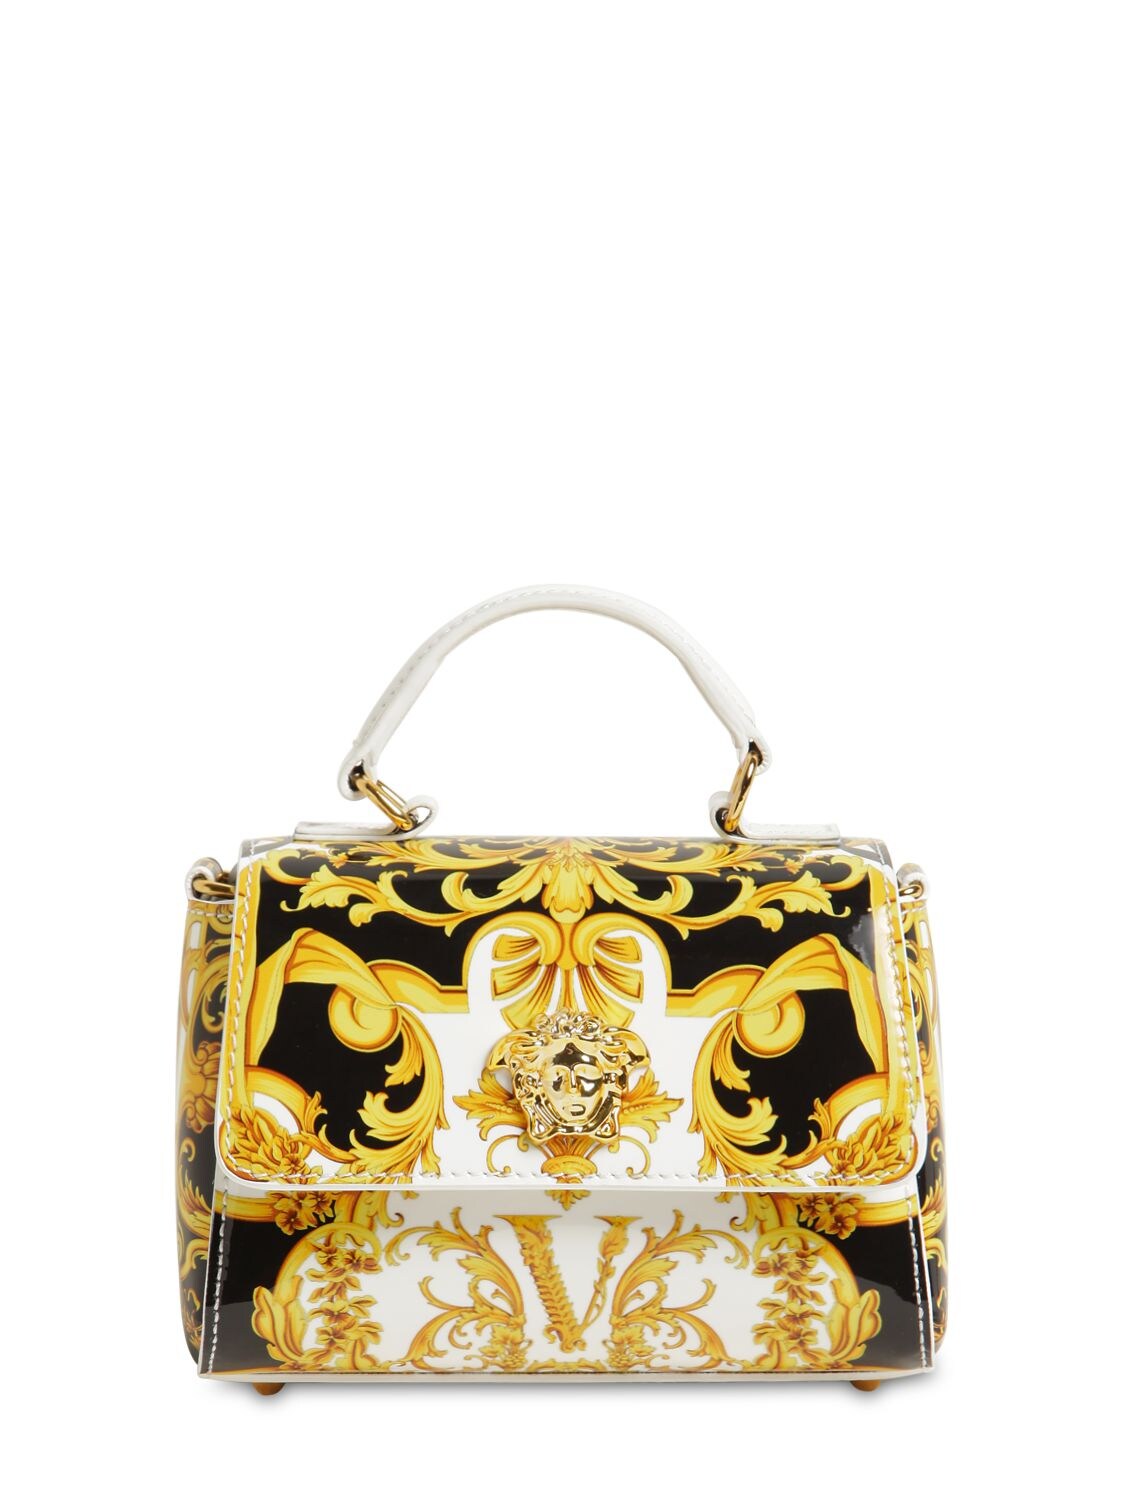 Versace Baroque Print Patent Leather Bag In Multicolor